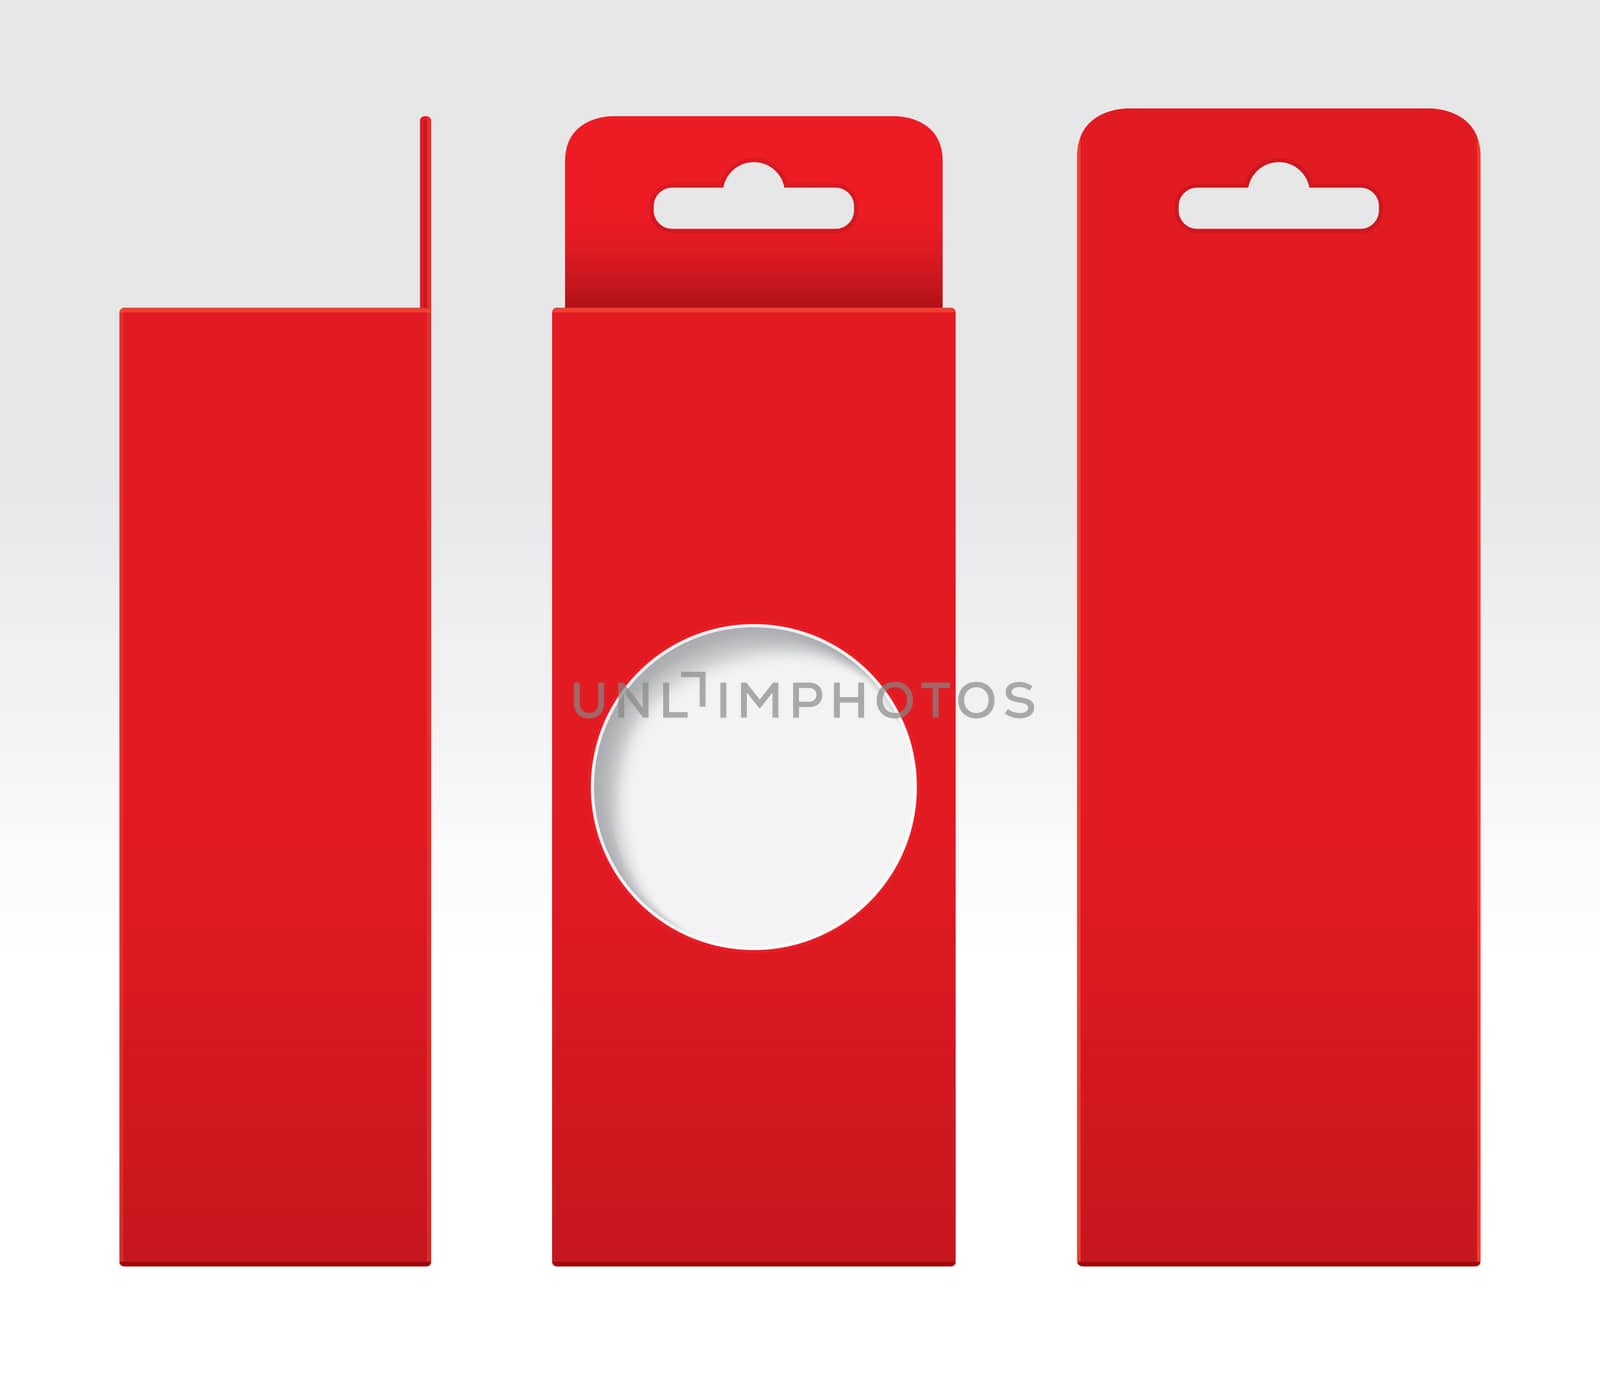 Hanging Red Box window cut out Packaging Template blank, Empty Box red Cardboard, Gift Boxes red kraft Package Carton, Premium red box empty by cgdeaw